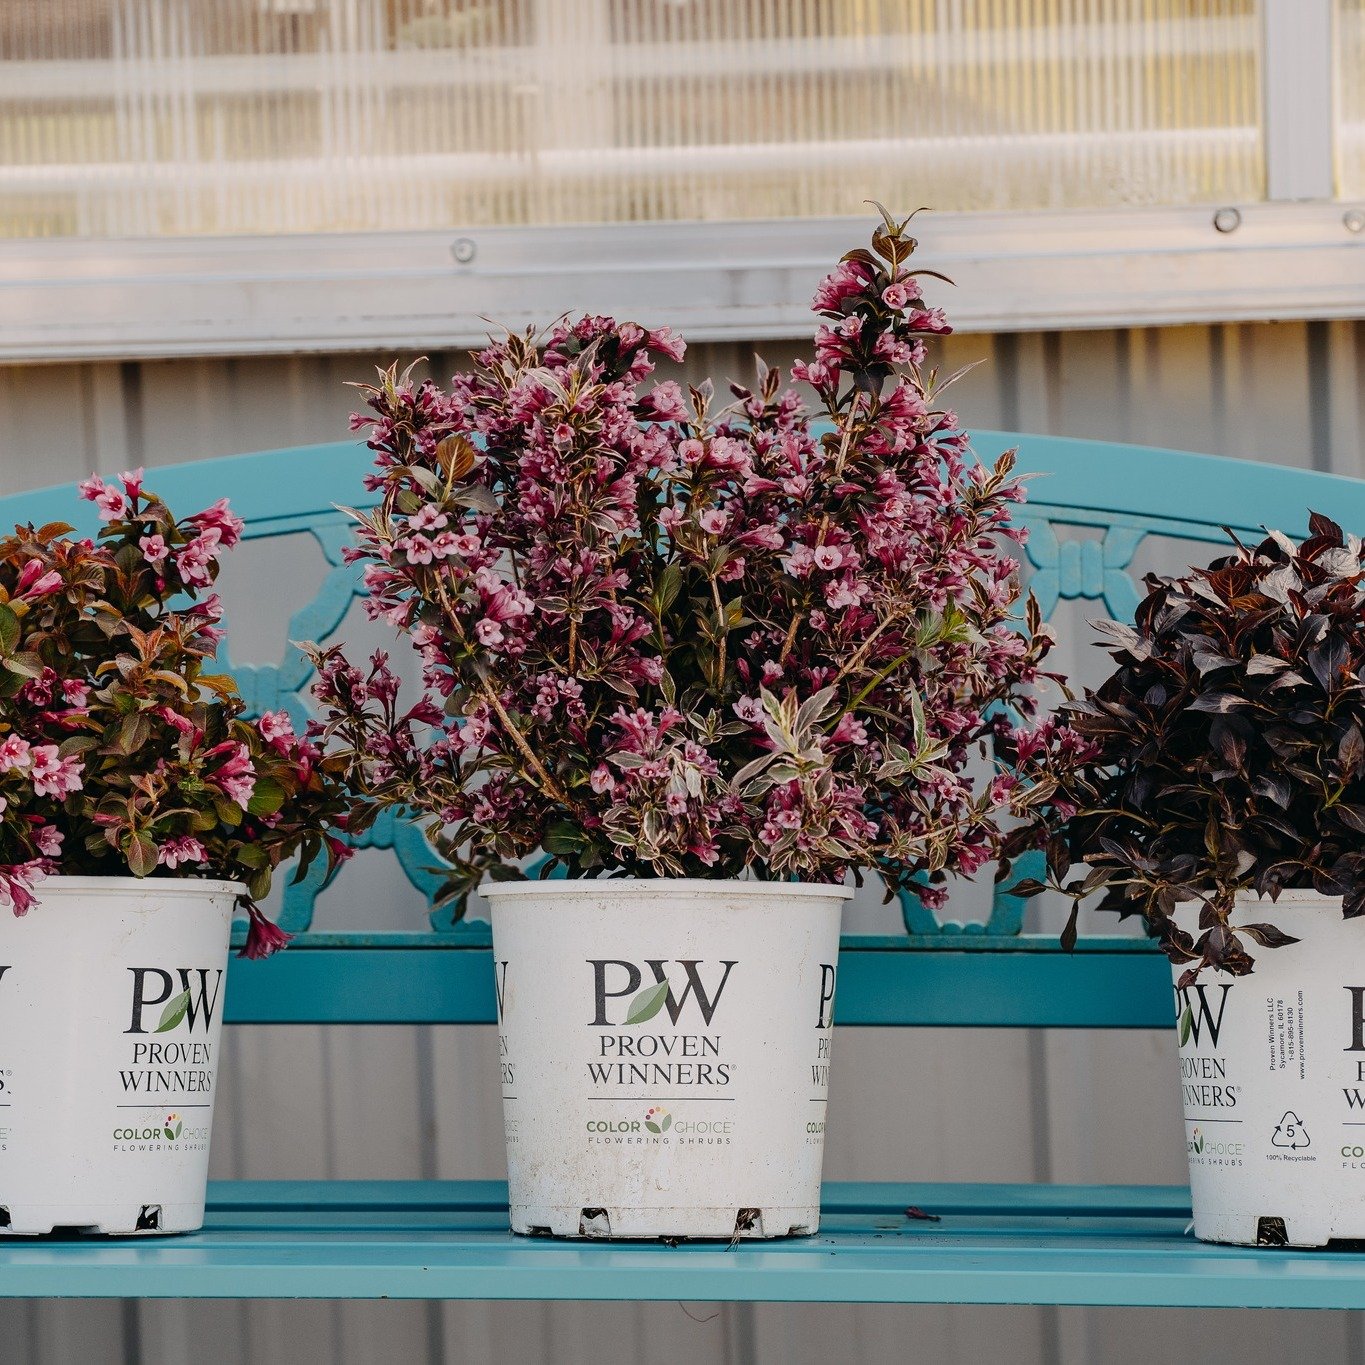 Plant Feature of the Day! ✨Weigela are beautiful deer-resistant, flowering shrubs! 😃

They are excellent for creating privacy, screening unsightly features, growing below windows and more. Plant them in full sun for the best flowers!

#wiegela #down